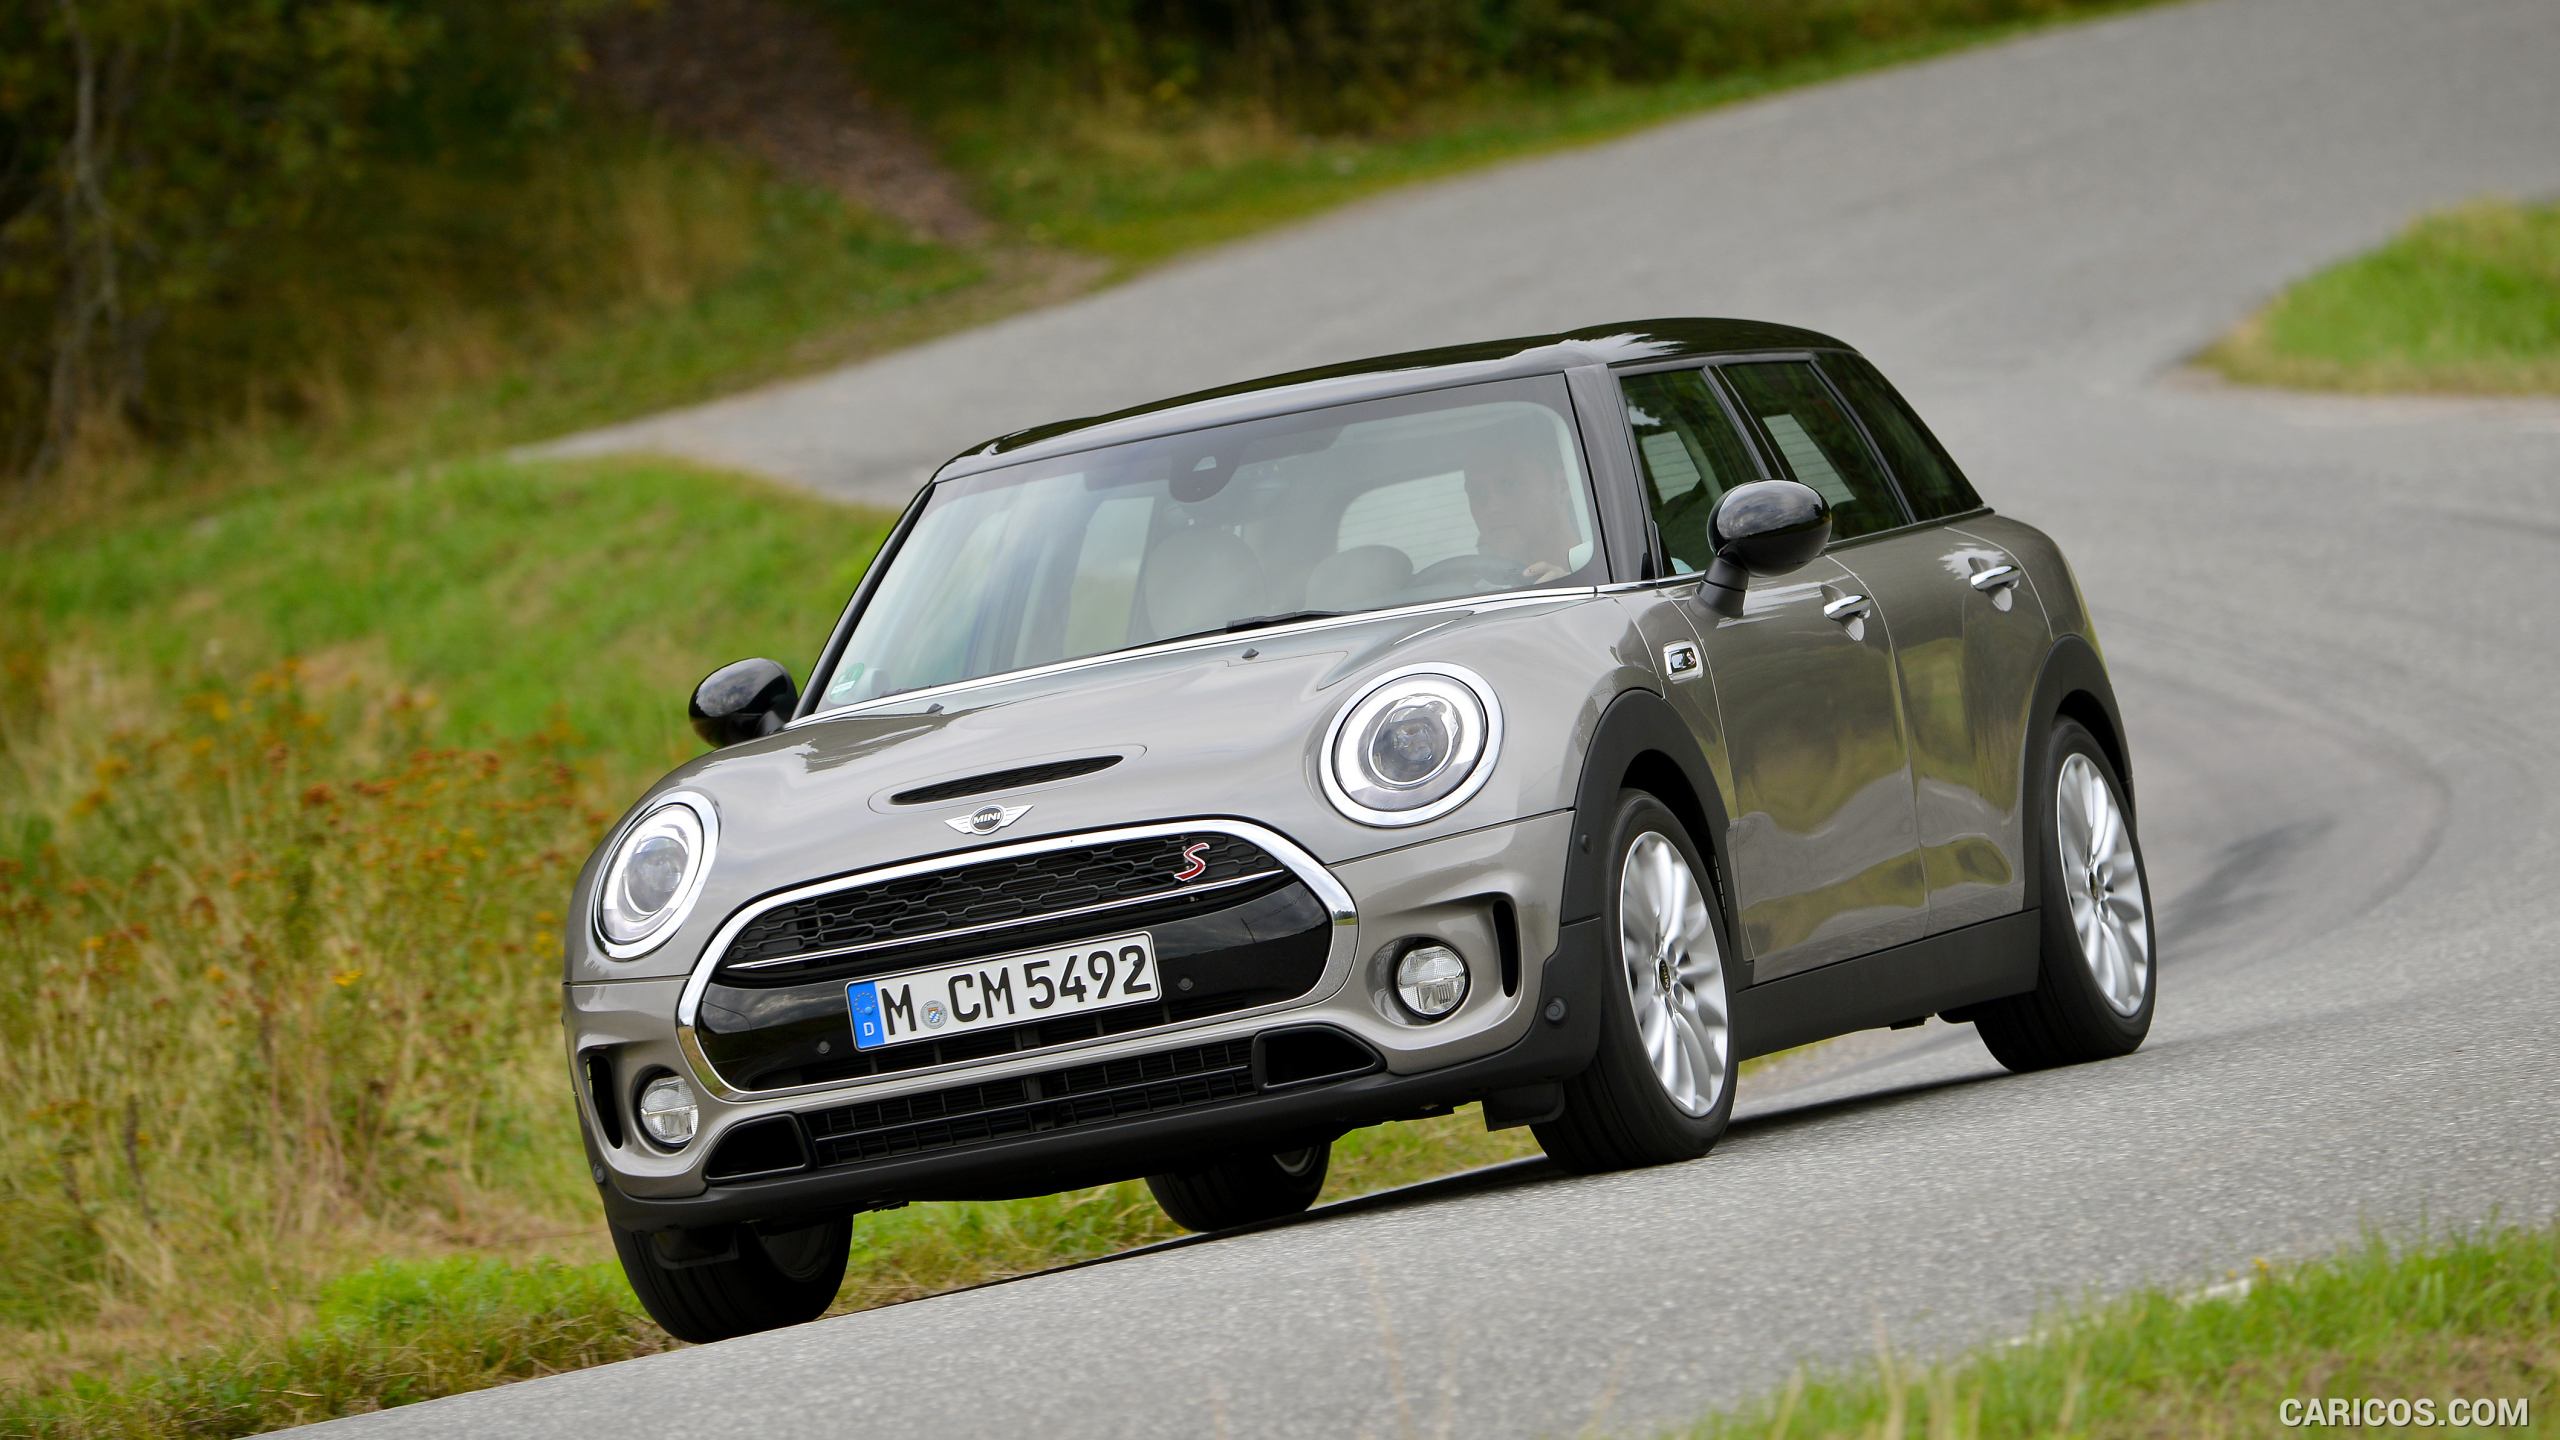 2016 MINI Cooper S Clubman in Metallic Melting Silver - Front, #128 of 380